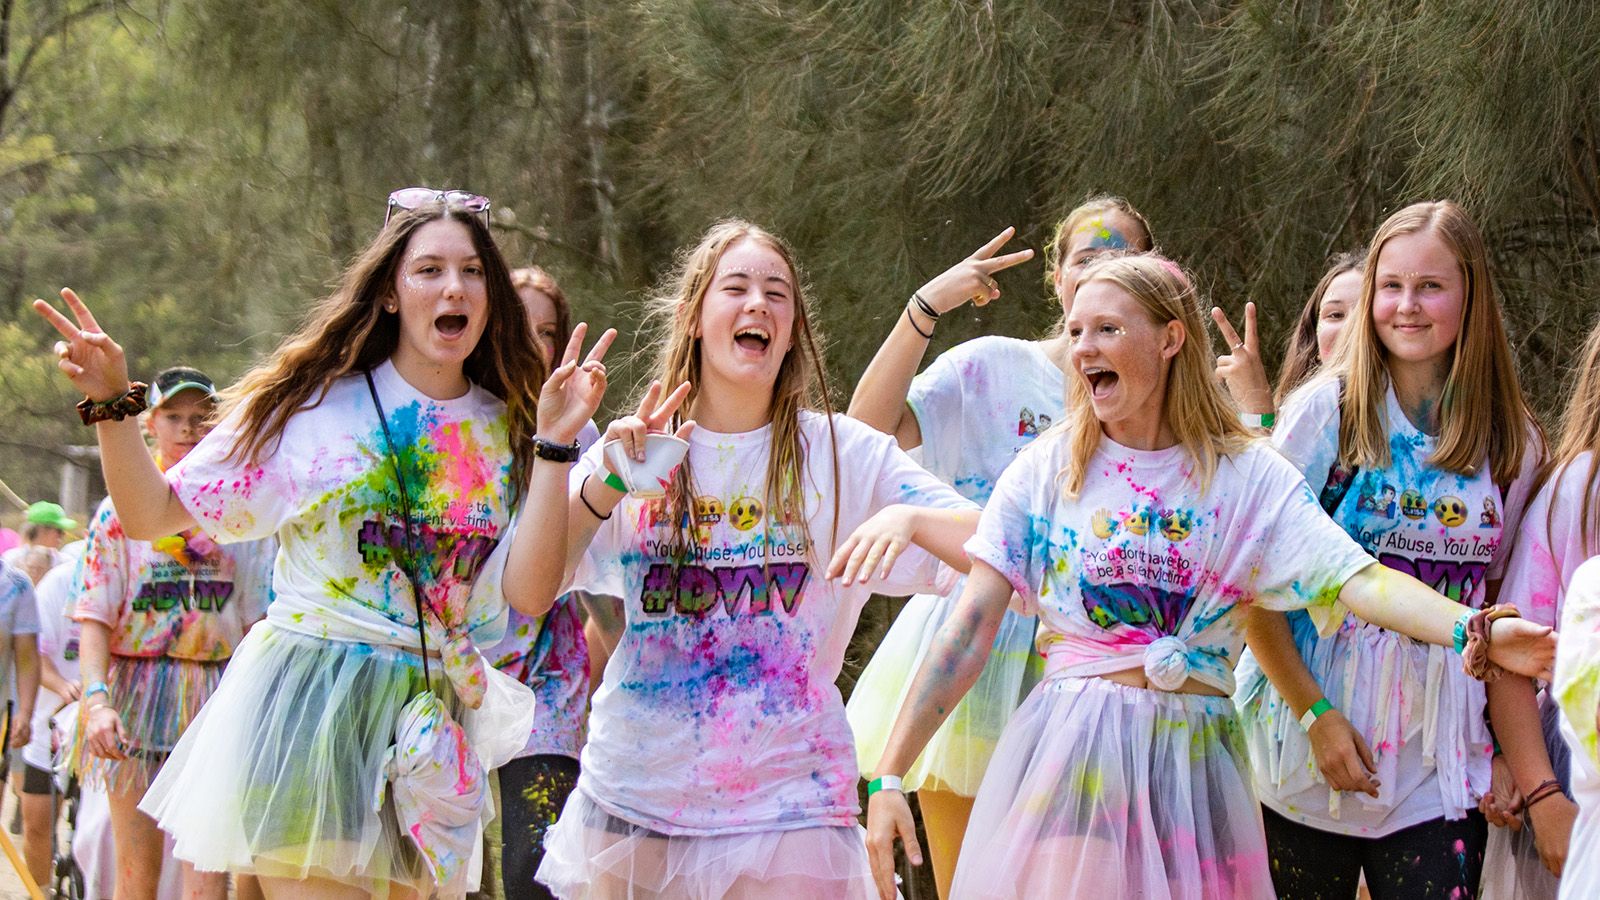 Four teenage girls in colourful pastel clothing singing together banner image